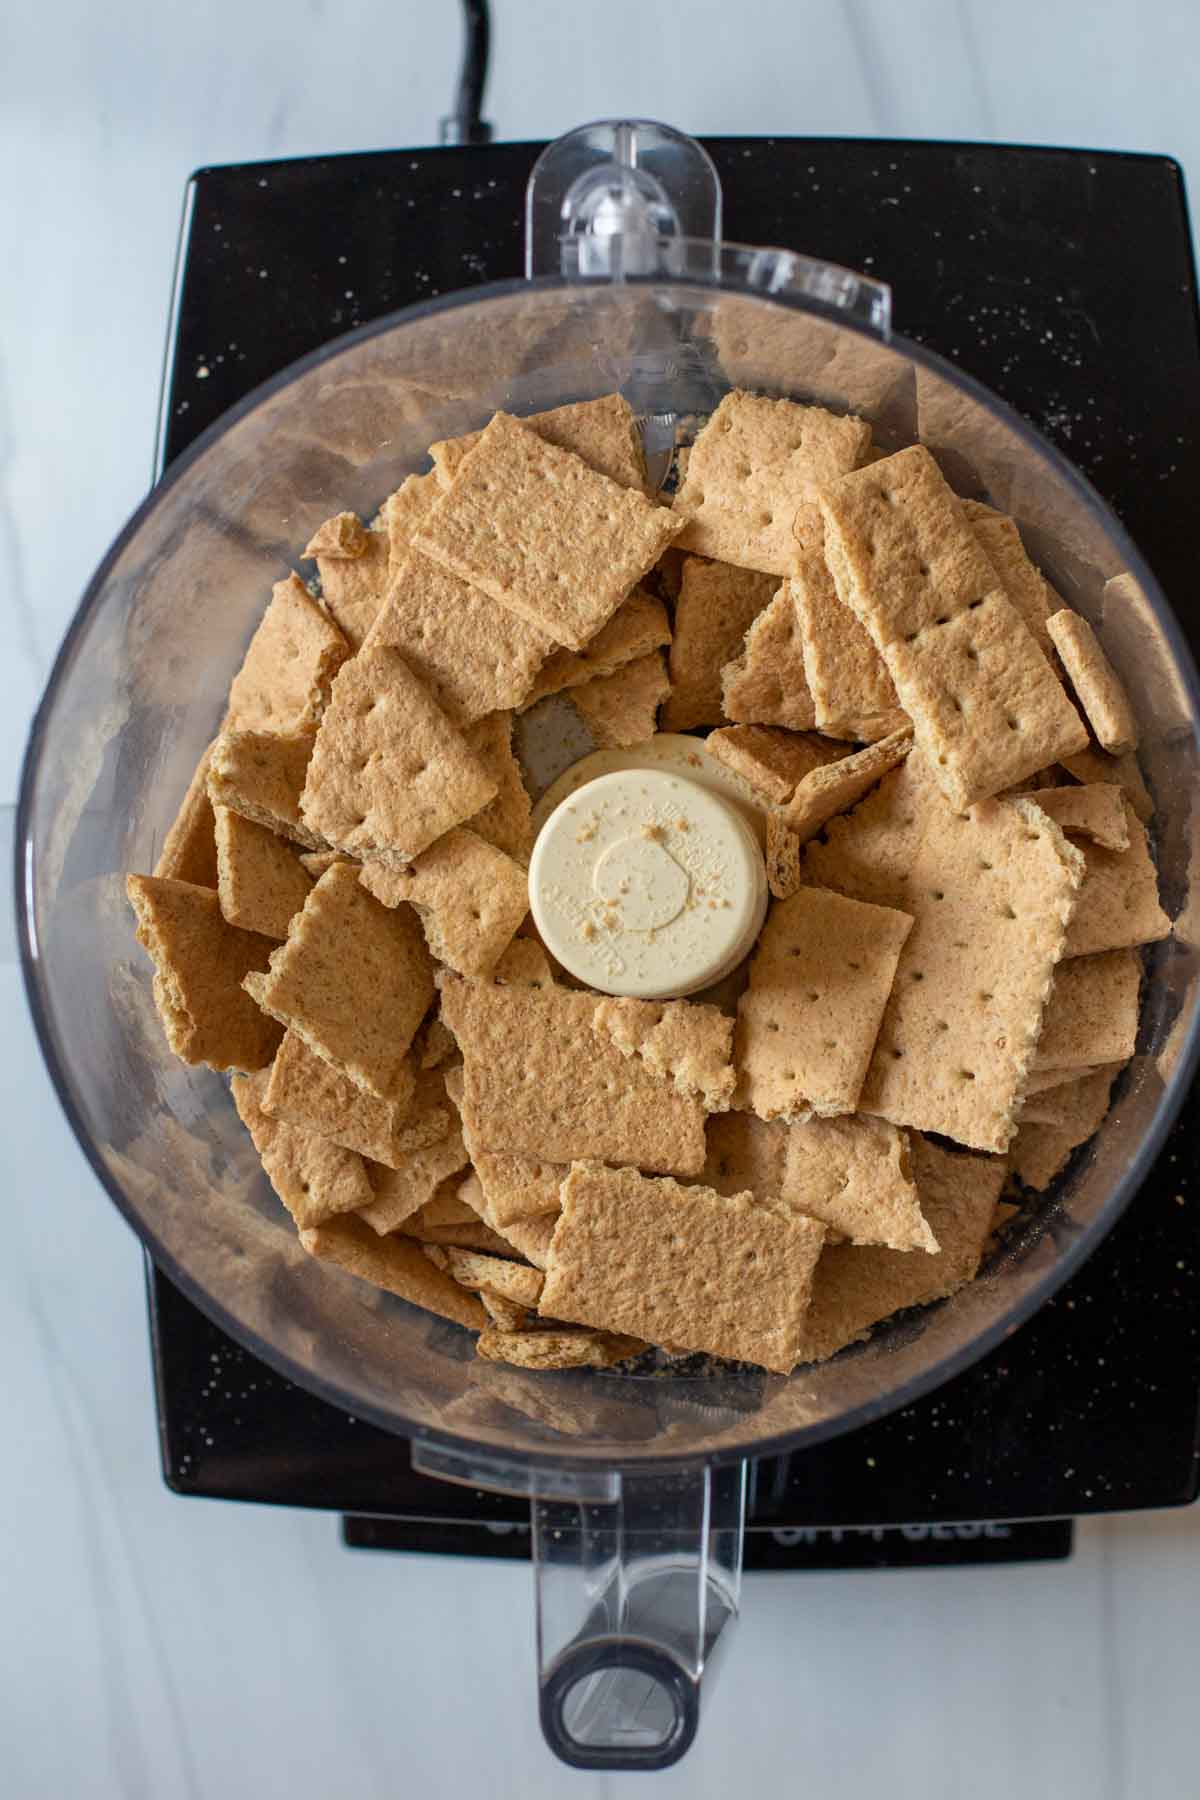 Graham crackers in a food processor.